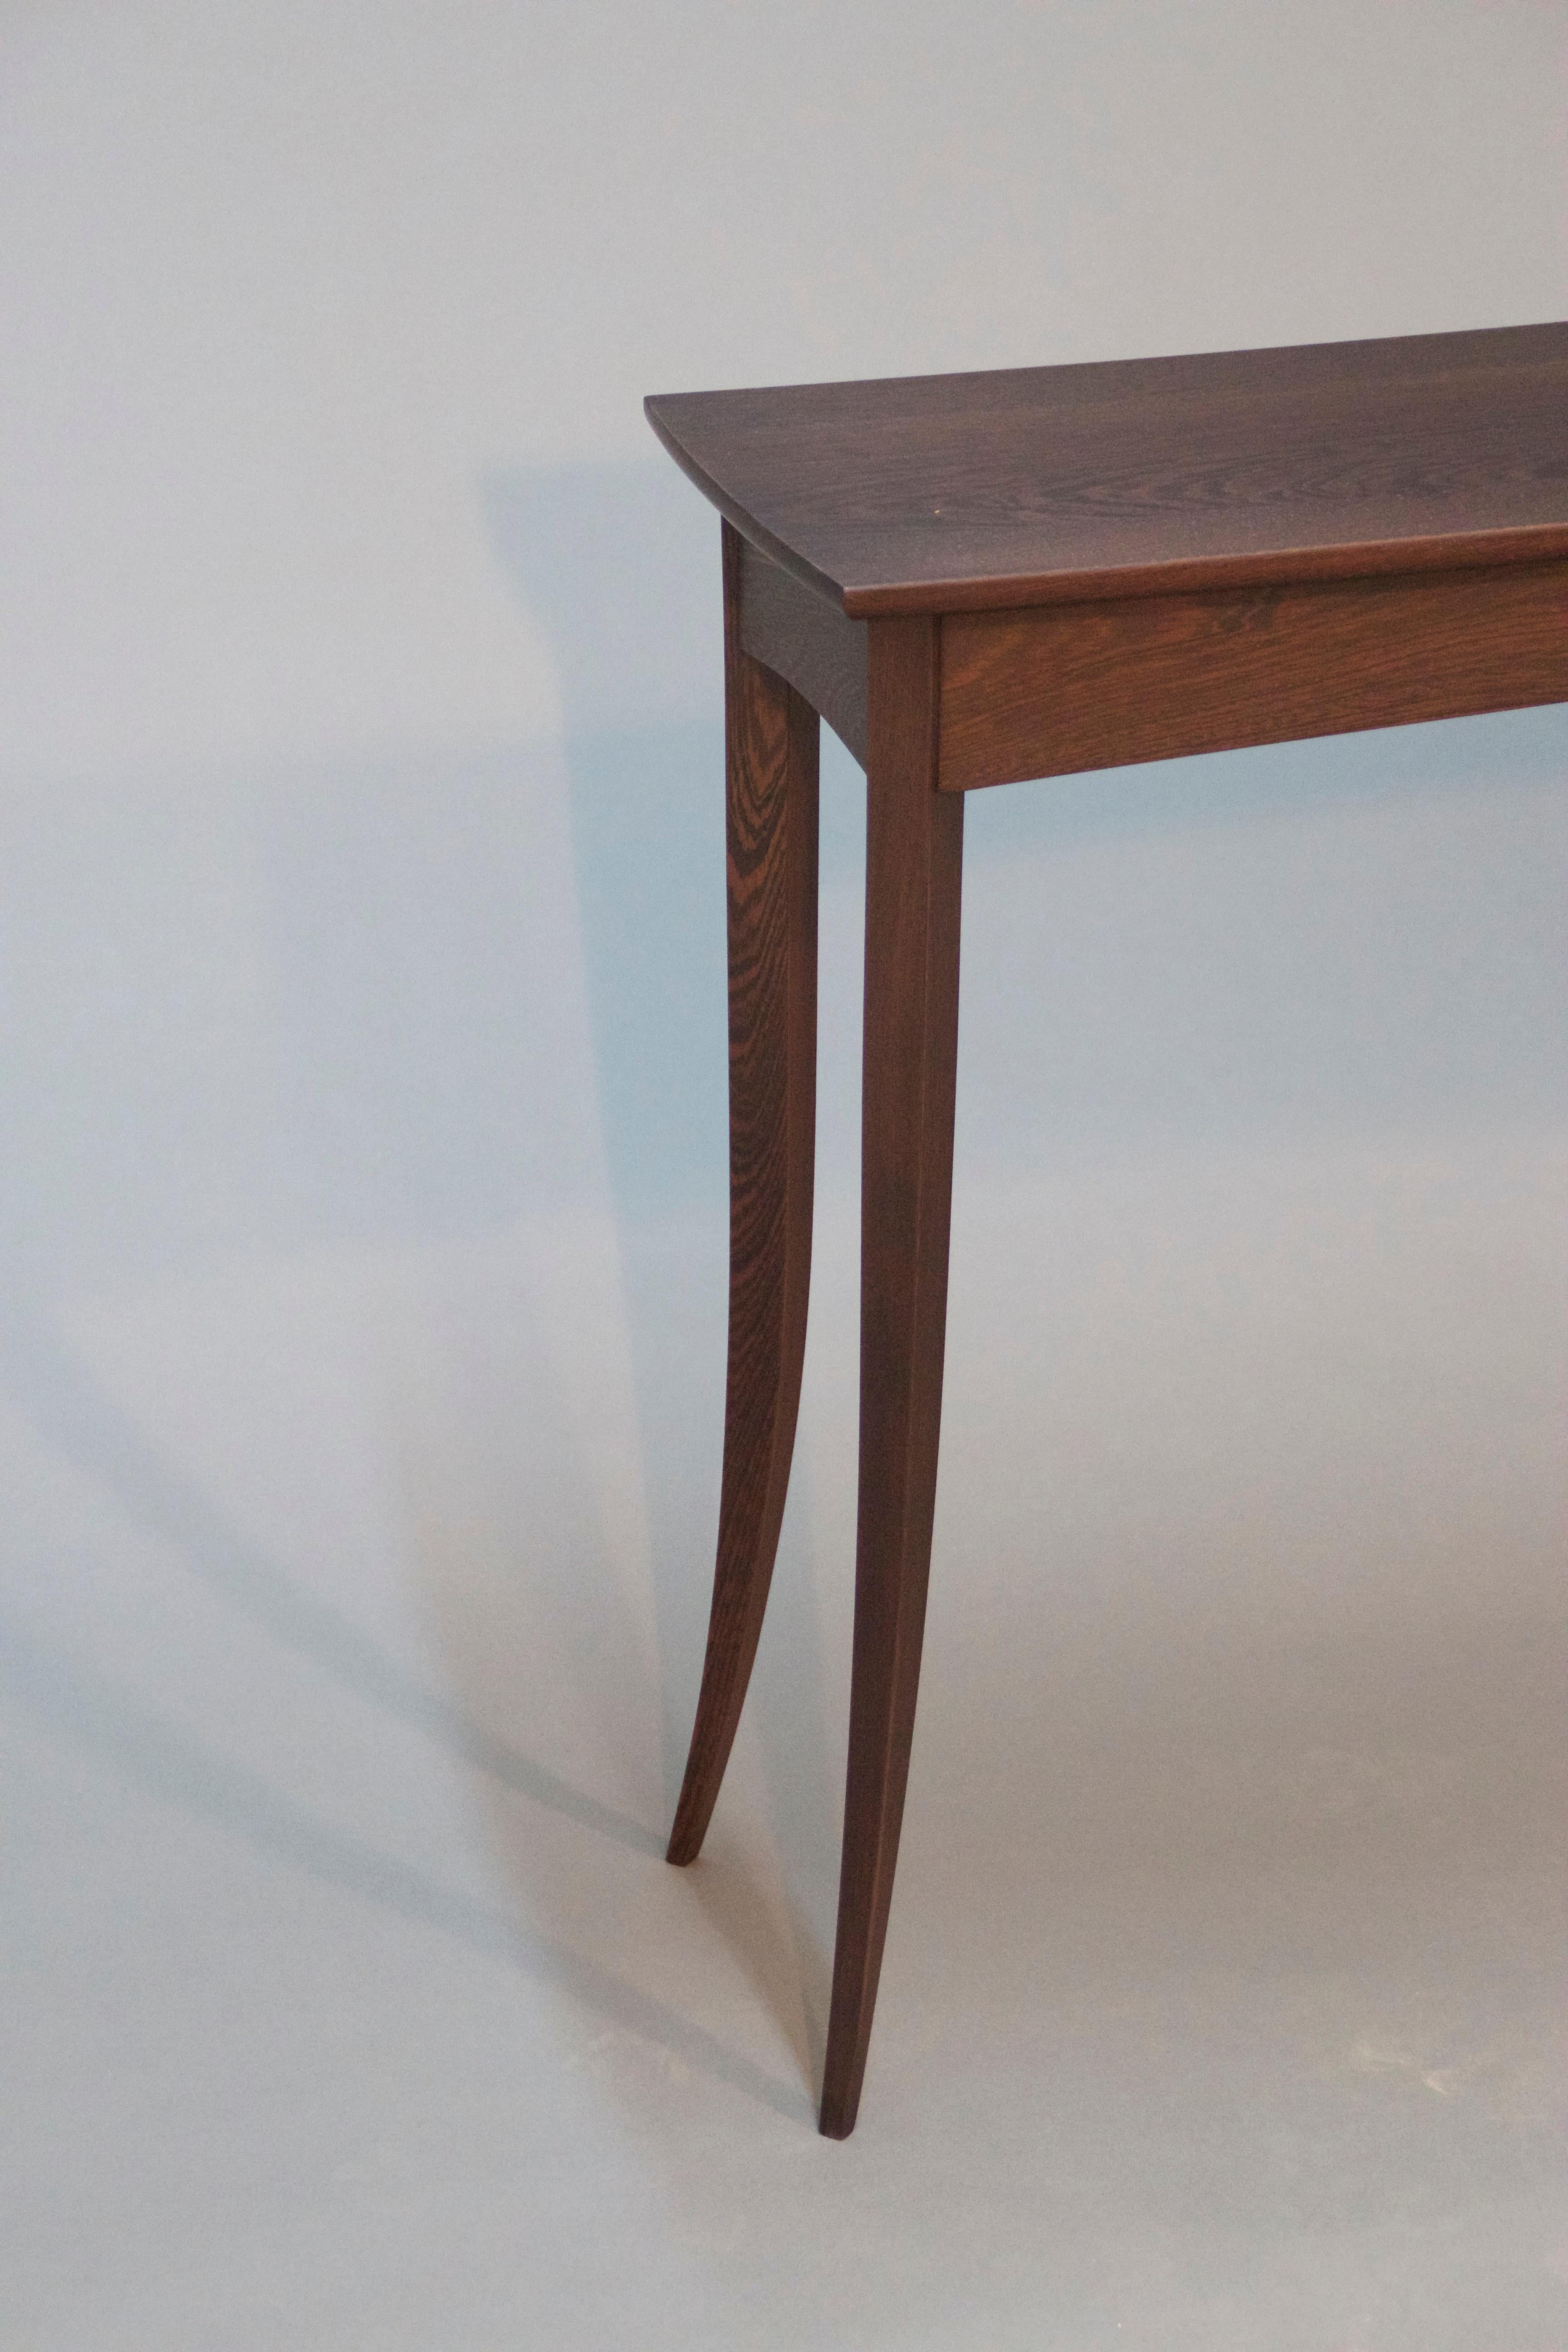 Modern Graceful Solid Hardwood Narrow Table with Natural Finish by Dave Lasker For Sale